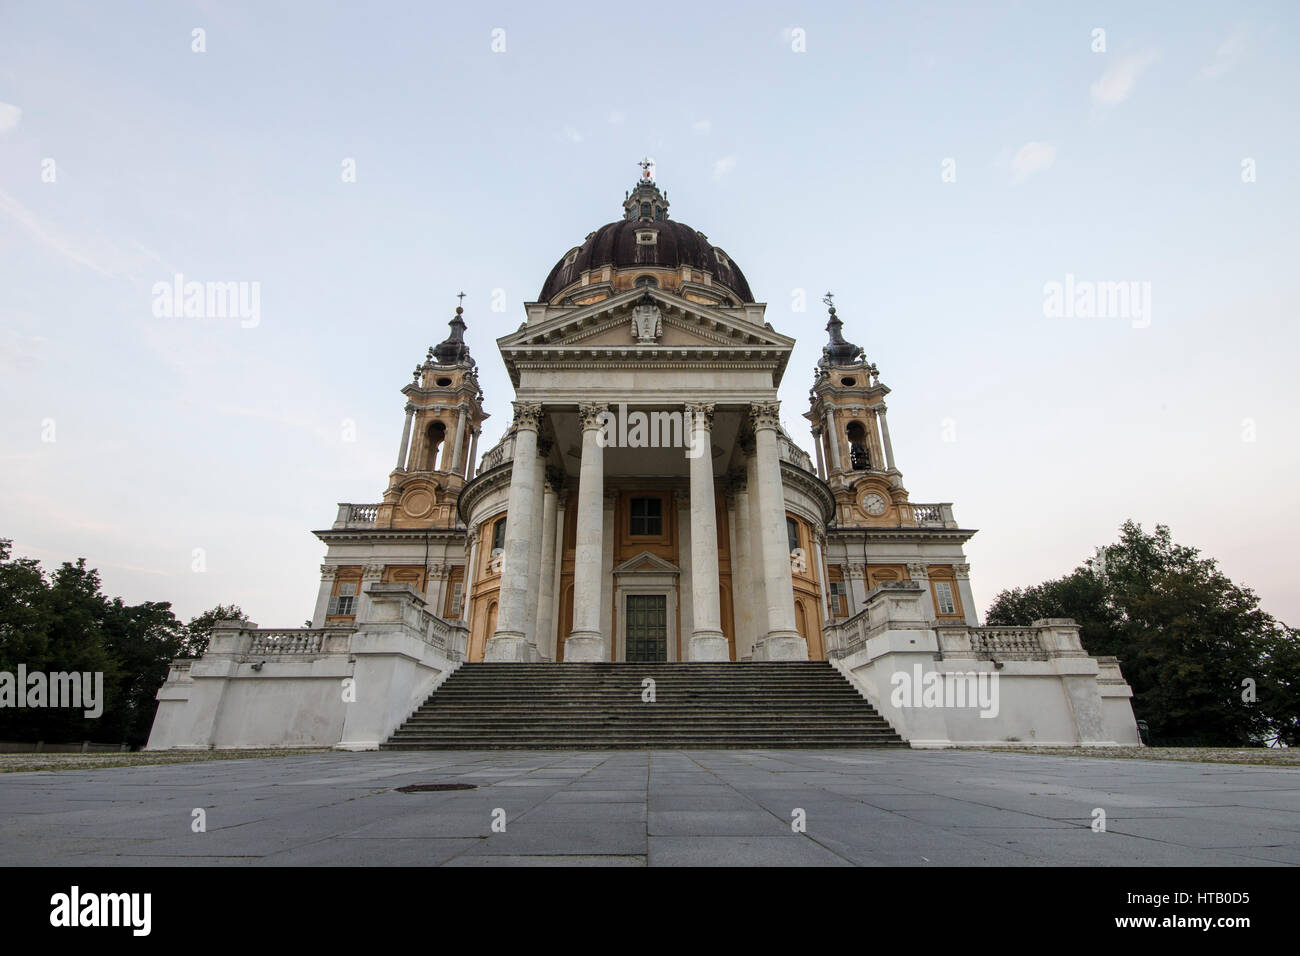 Basilica di Superga, a baroque church in the vicinity of Turin (Torino), Italy, and burial place of the Savoy family. Stock Photo